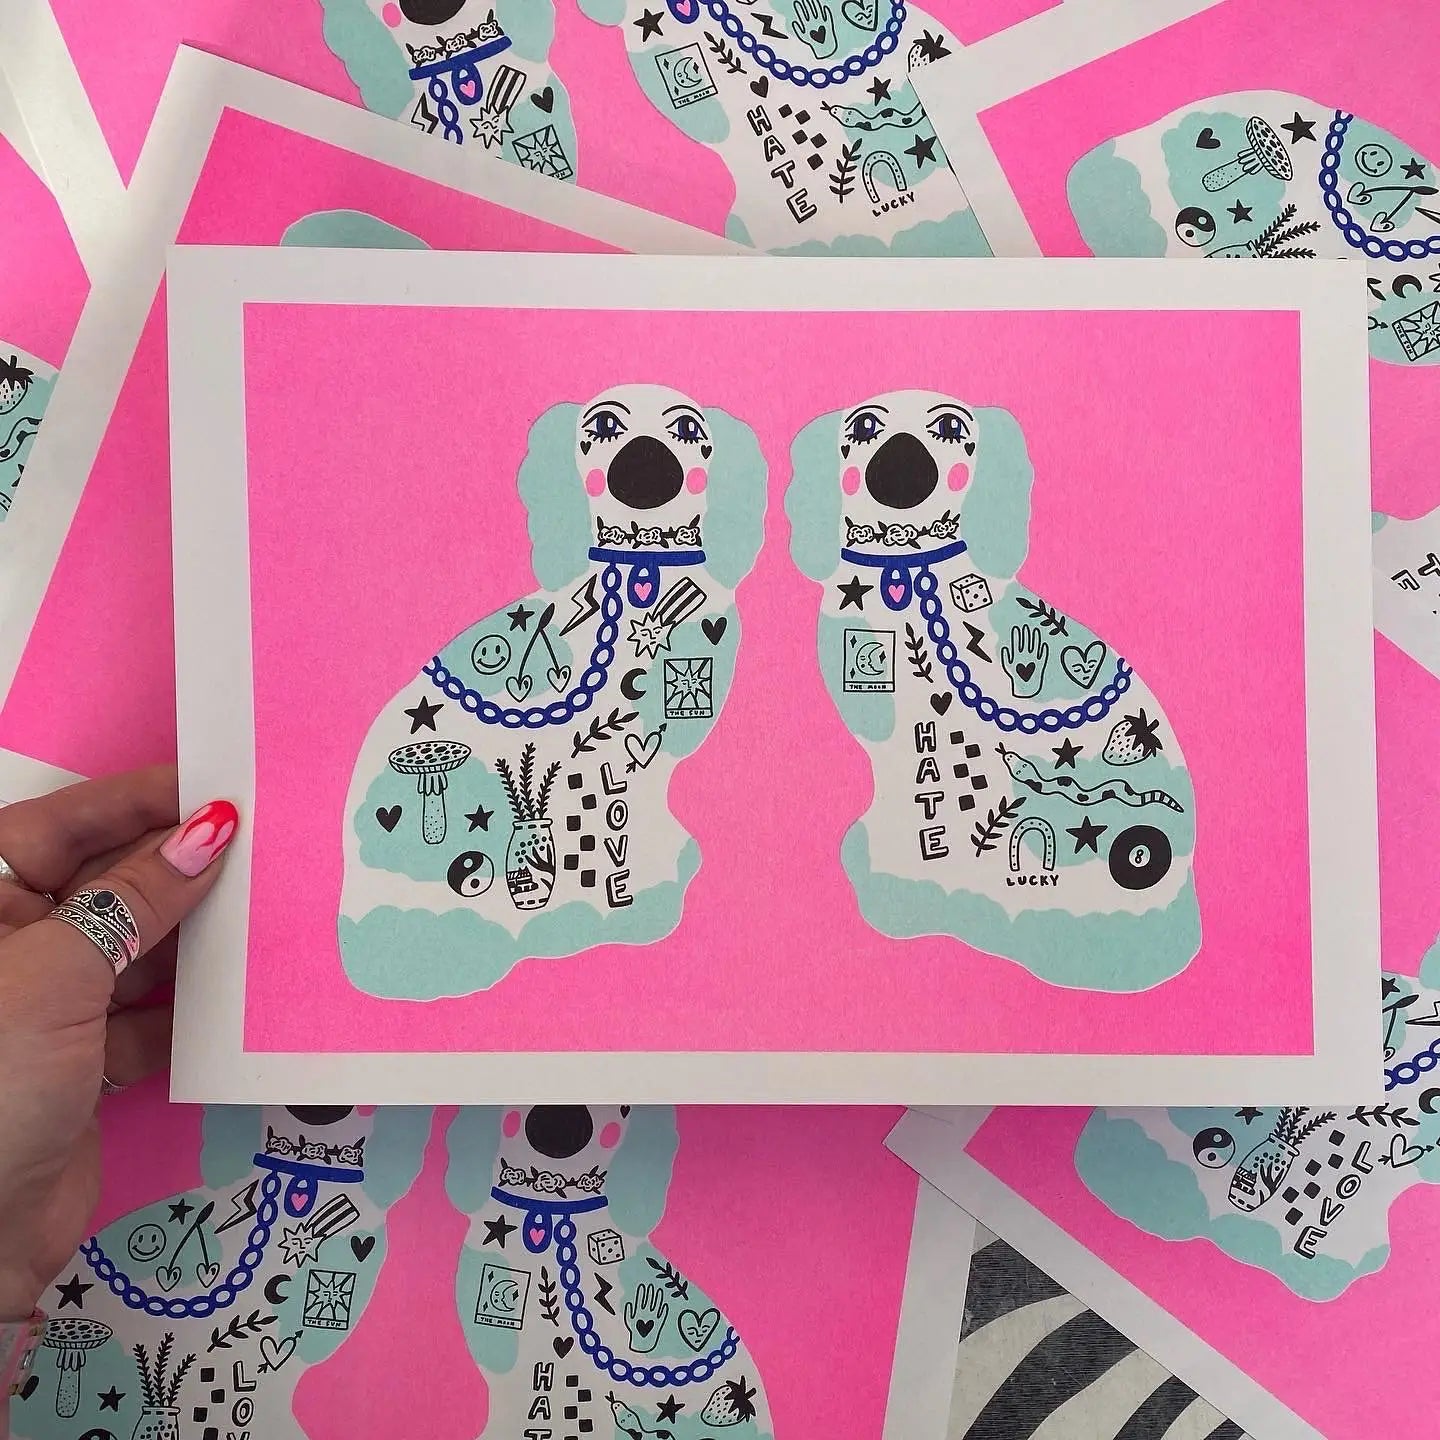 handmade print stephordshire dogs by Amy Hastings, neon pink background with two light blue tattood dogs